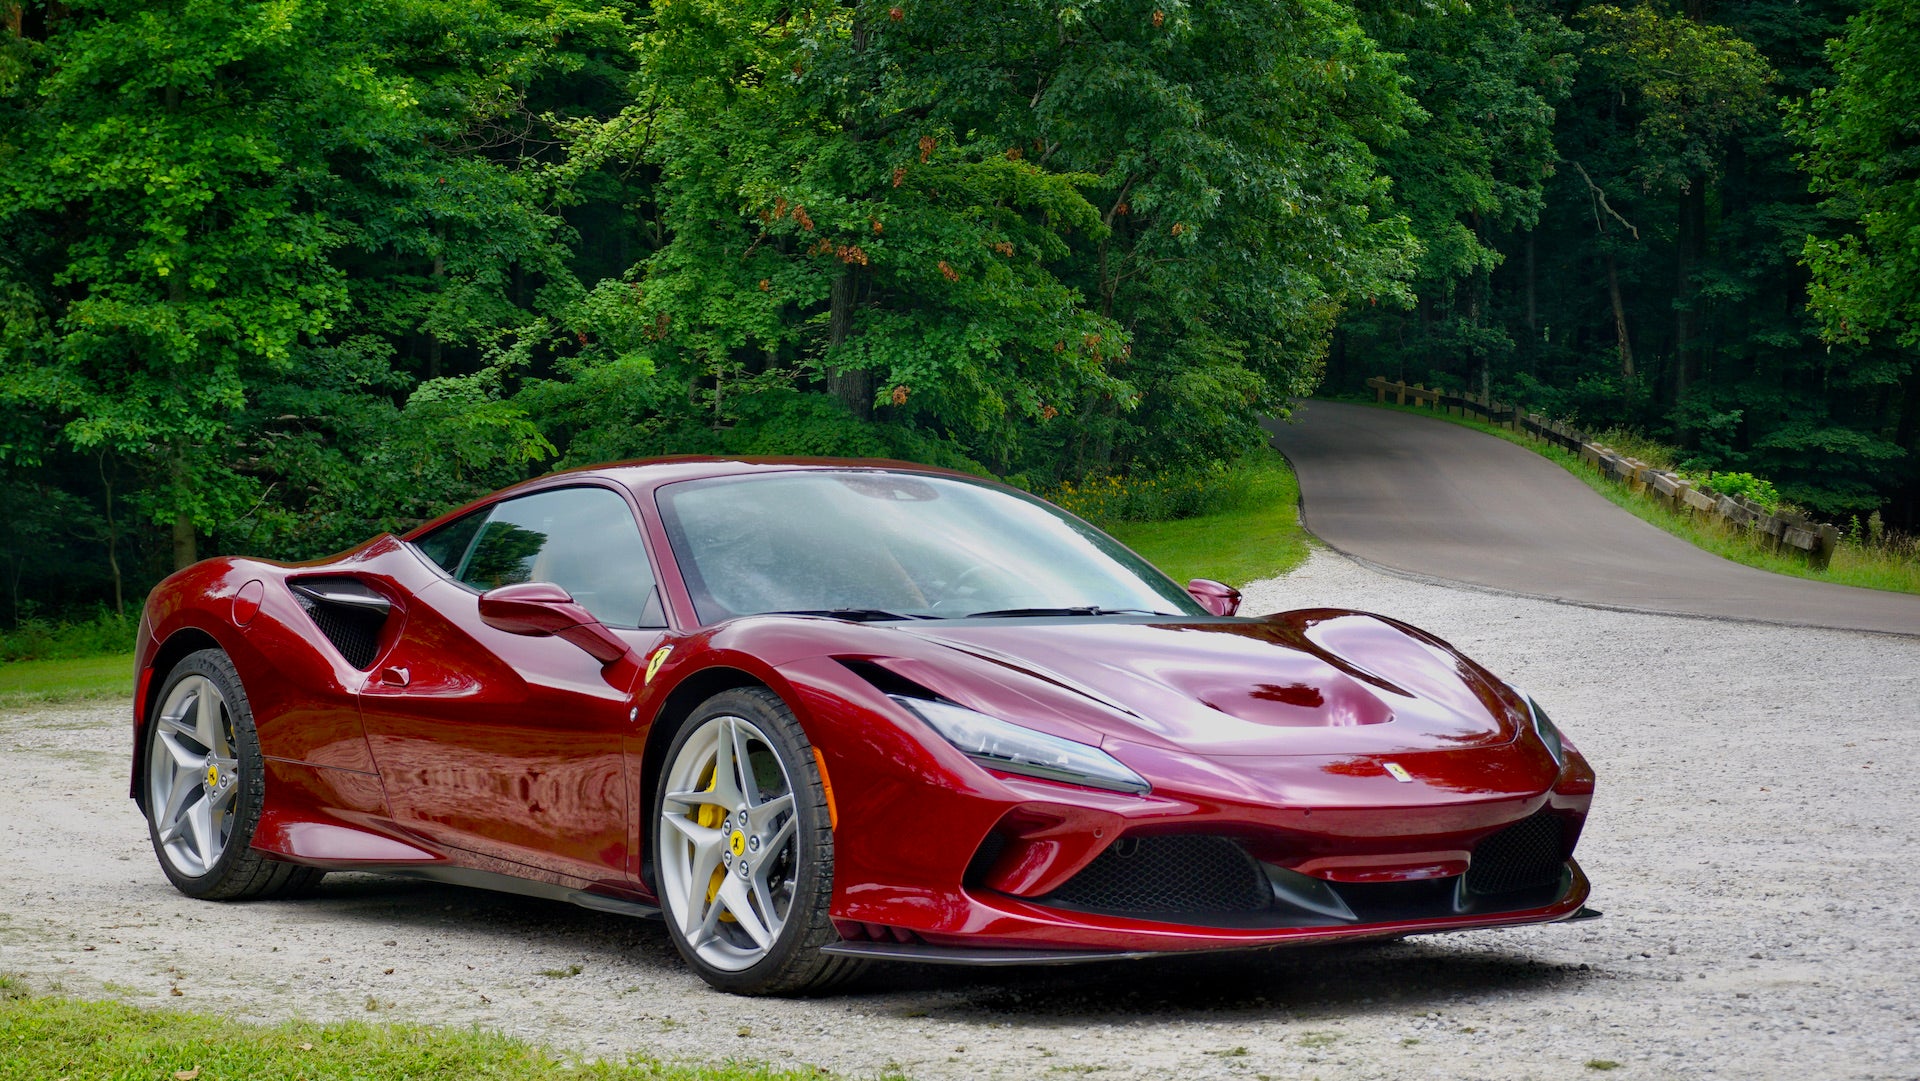 2020 Ferrari F8 Tributo Review: Parenting Made Easy | The Drive